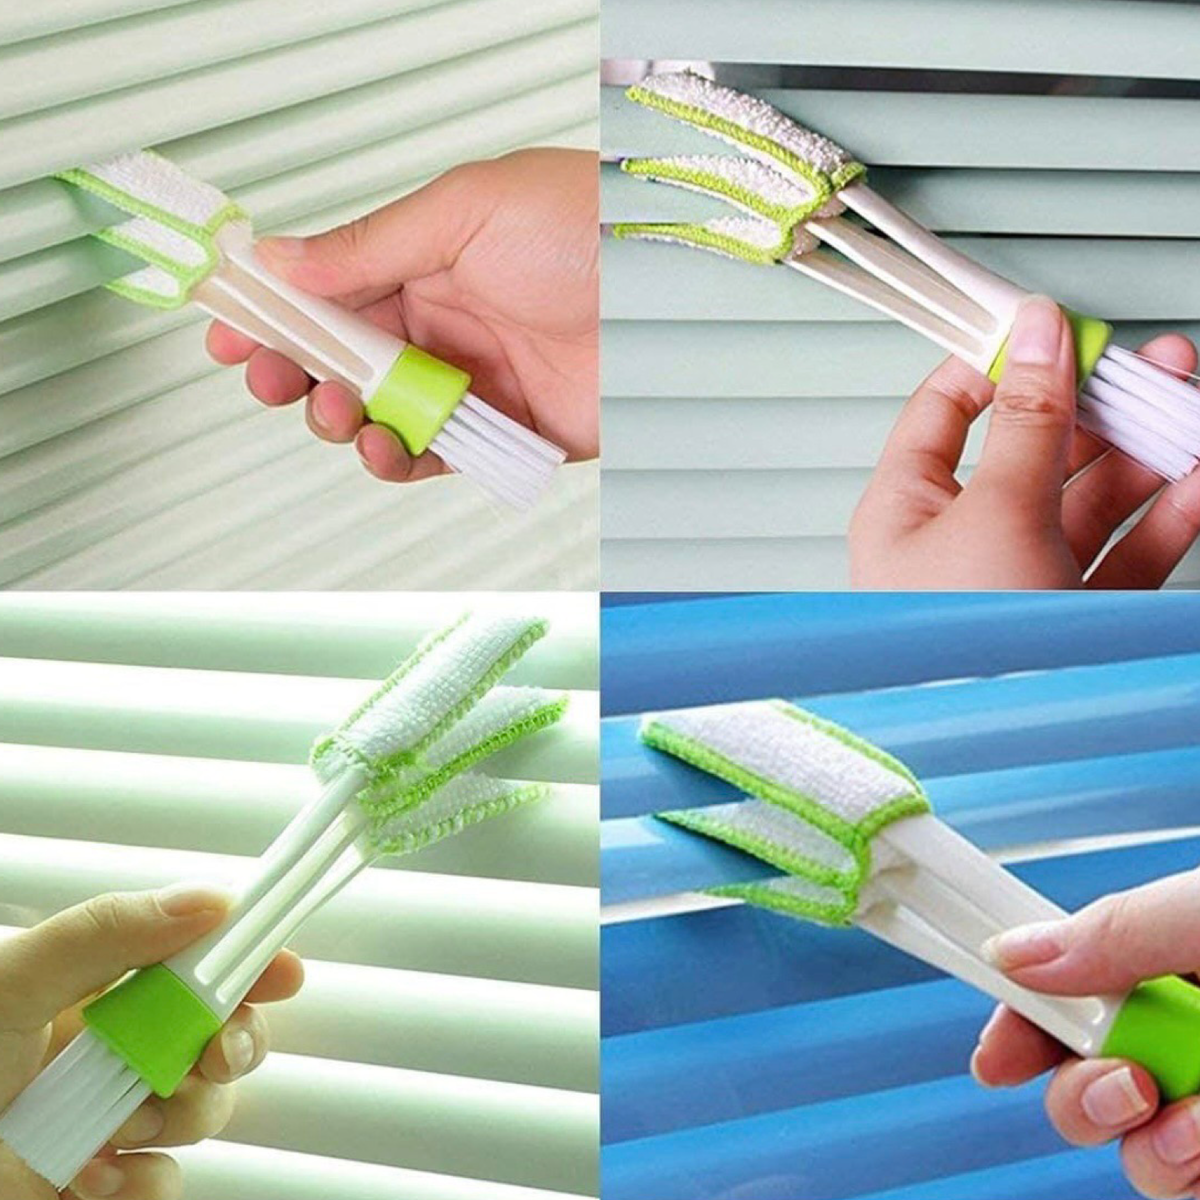 6" Double Ended Car Vent & Window Blinds Cleaner -Dust Hard To Reach Places!